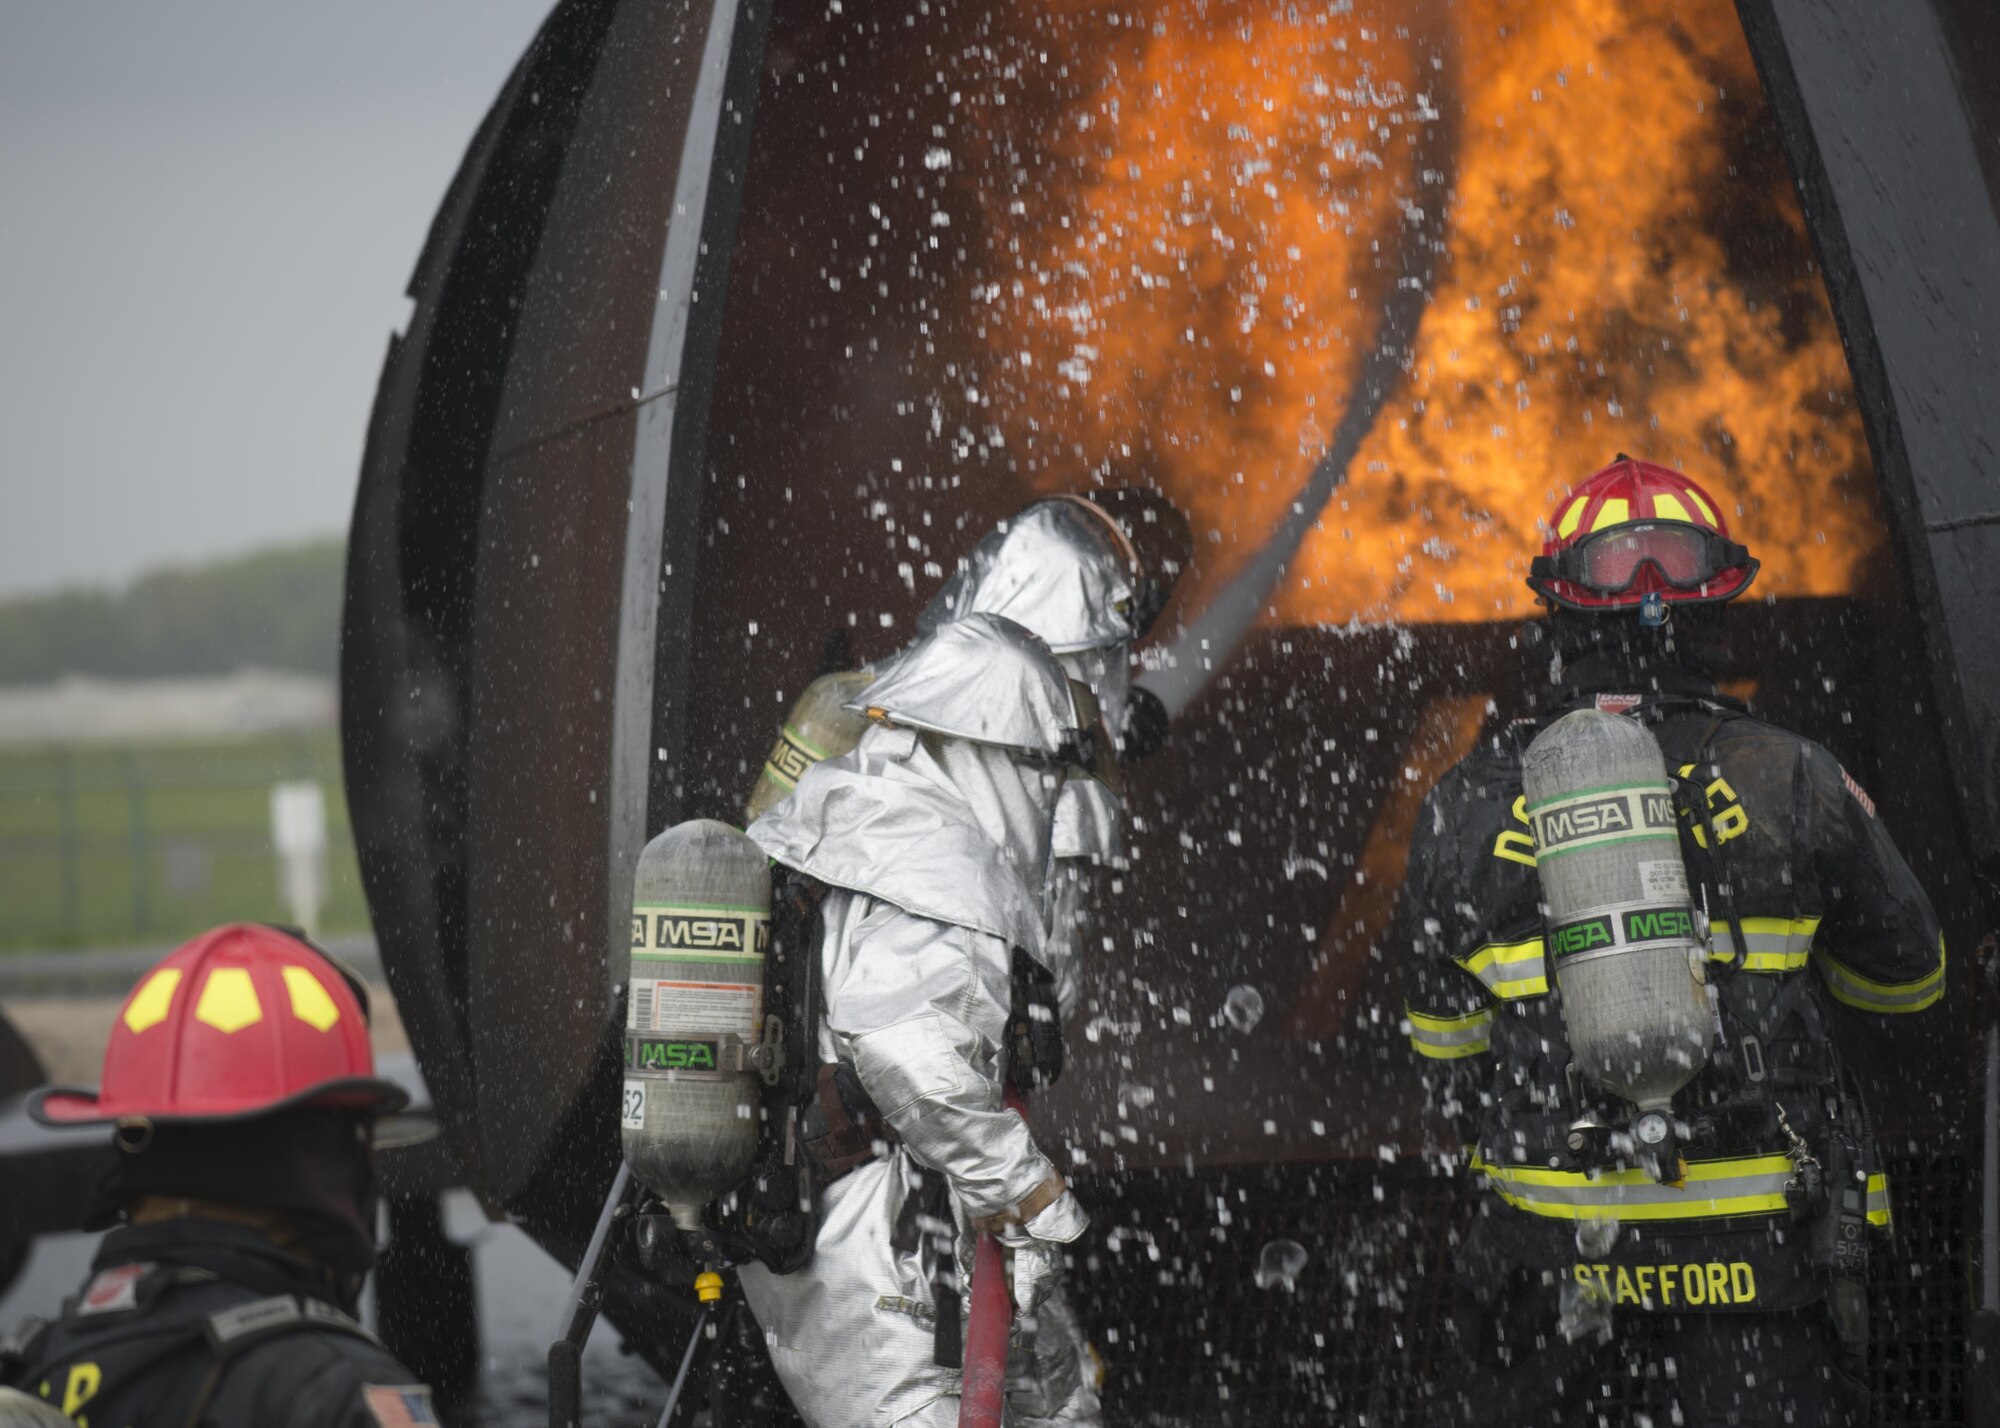 Airmen with the 512th Airlift Wing train fire-fighting skills as they extinguish an aircraft fire at Dover Air Force Base Del., April 23, 2016. This training occurs twice a year to keep the fire fighters current and proficient in their training requirements. (U.S. Air Force photo by Tech. Sgt. Nathan Rivard)